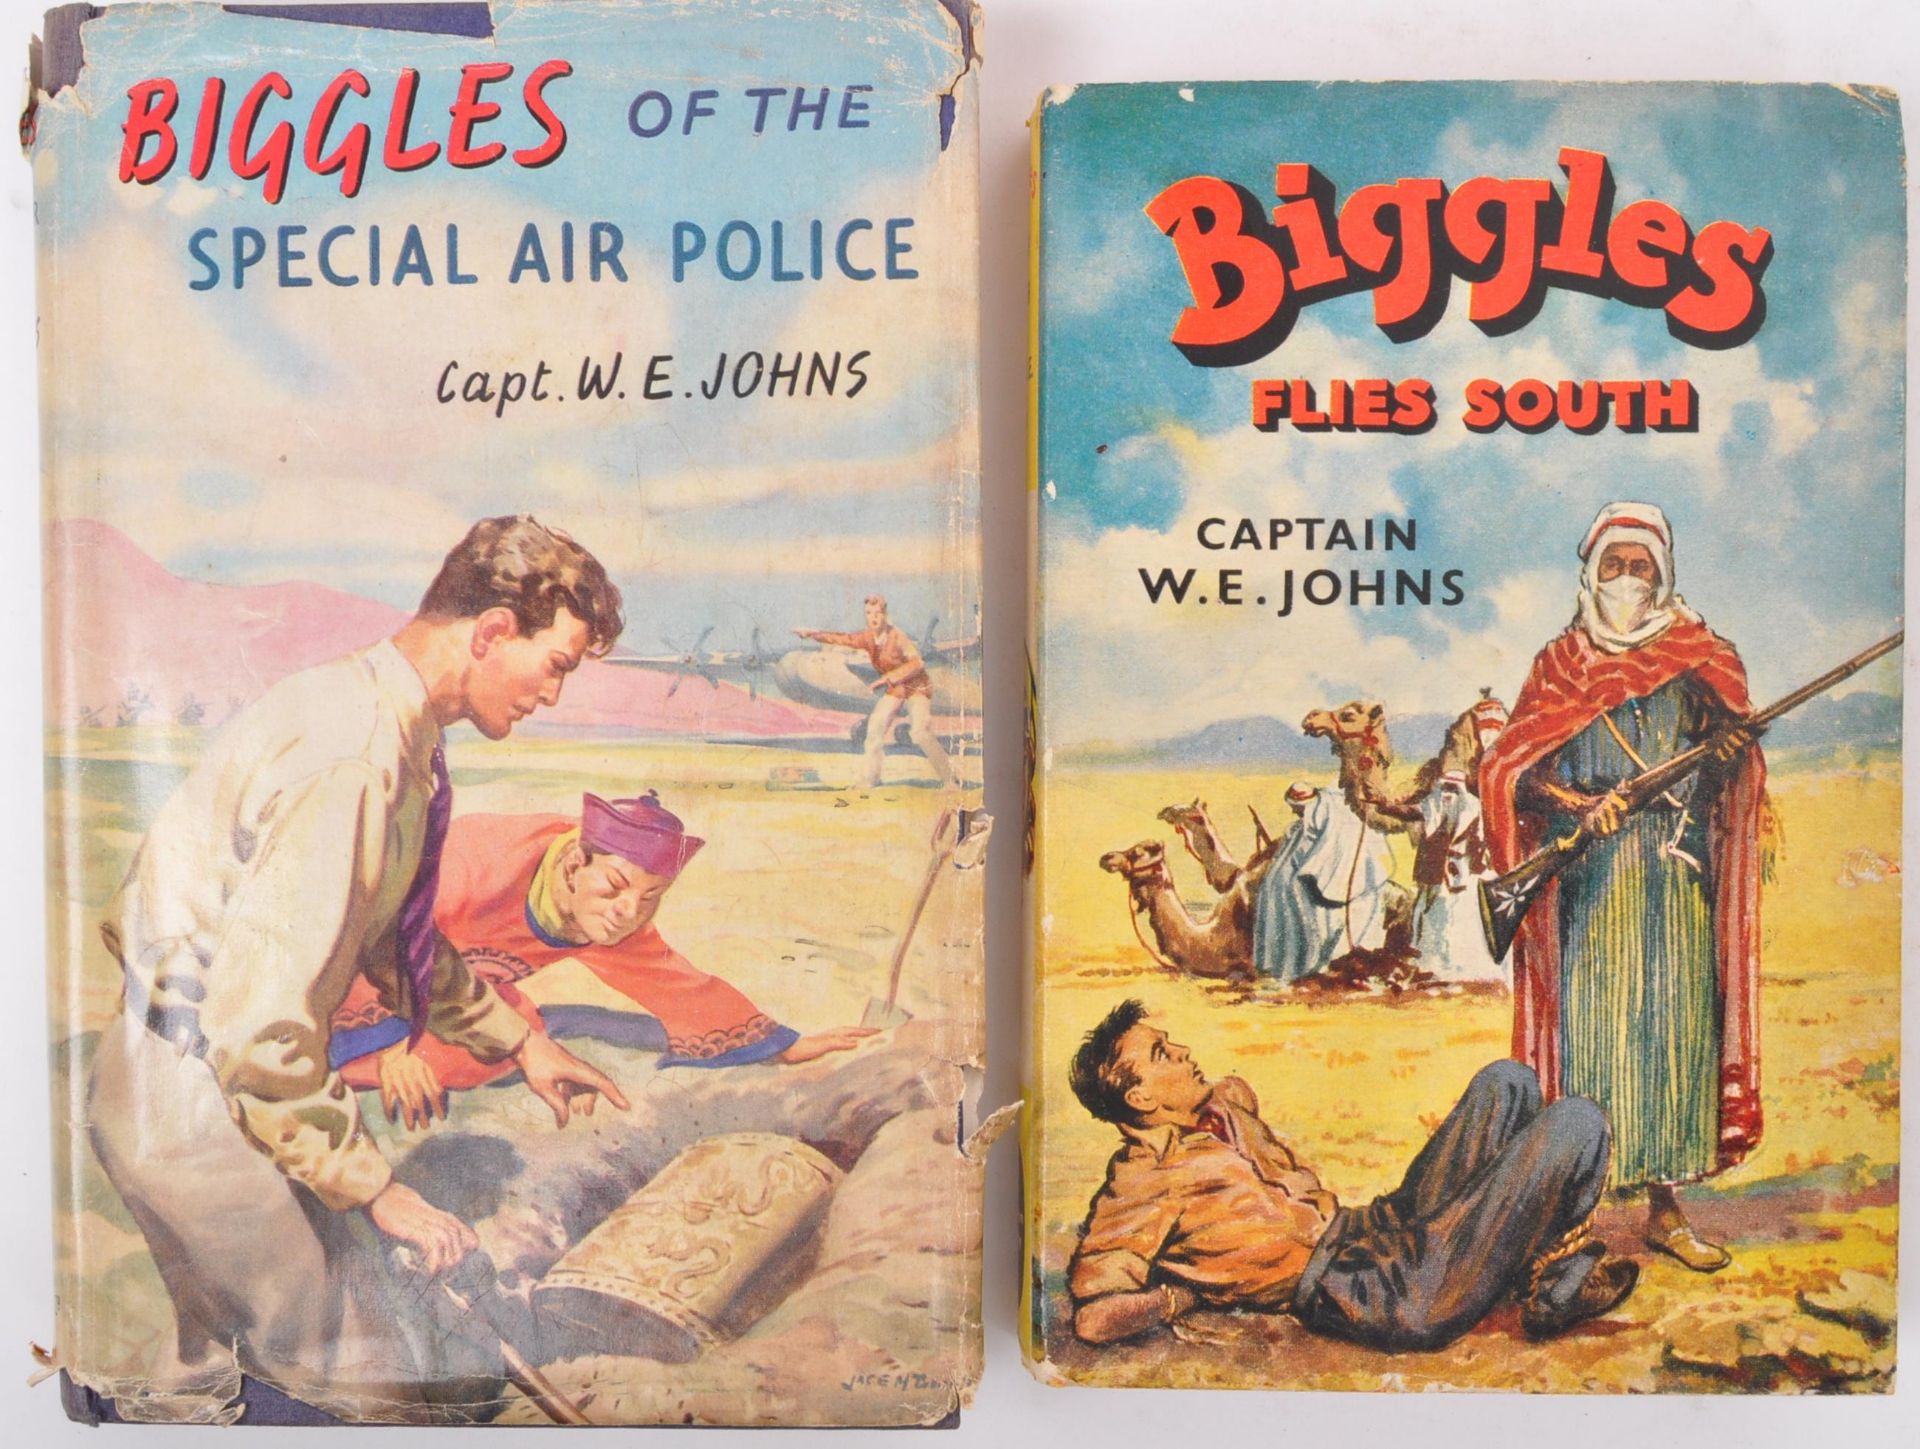 COLLECTION OF NINETEEN BIGGLES BOOKS BY CAPTAIN W.E. JOHNS - Image 7 of 10